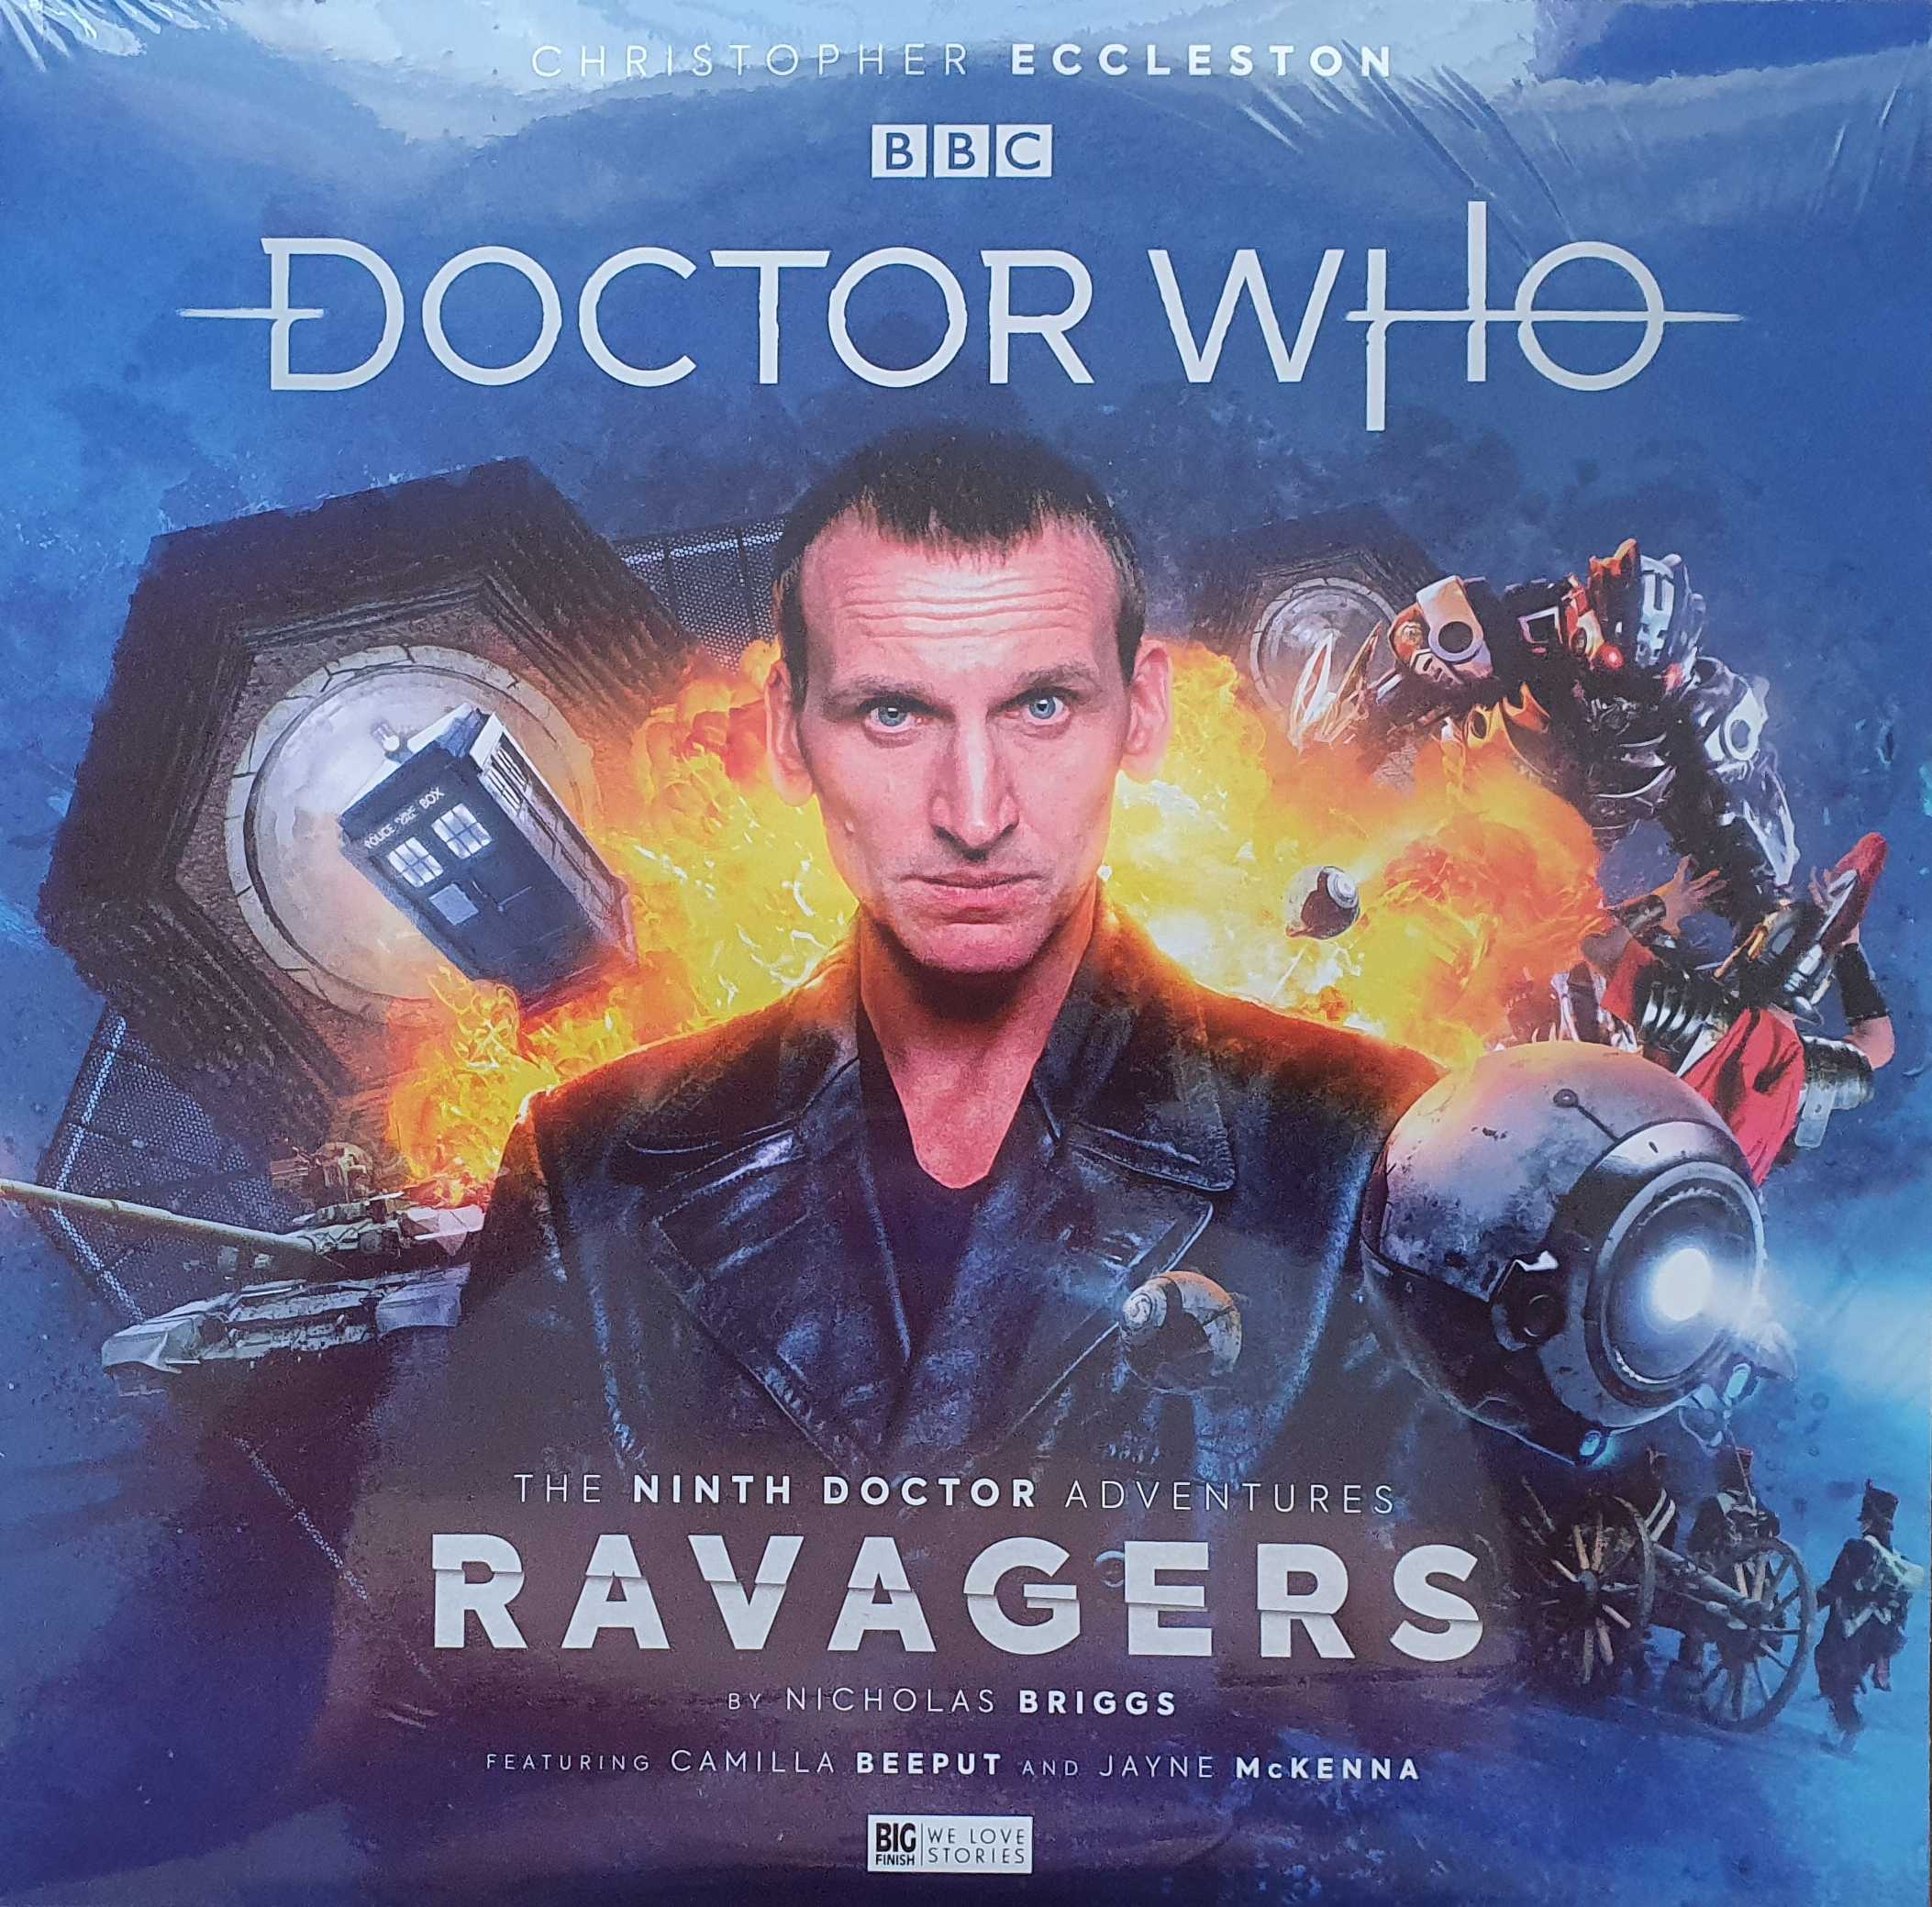 Picture of BFPDW9TH01V Doctor Who - Ravages by artist Nicholas Briggs from the BBC records and Tapes library